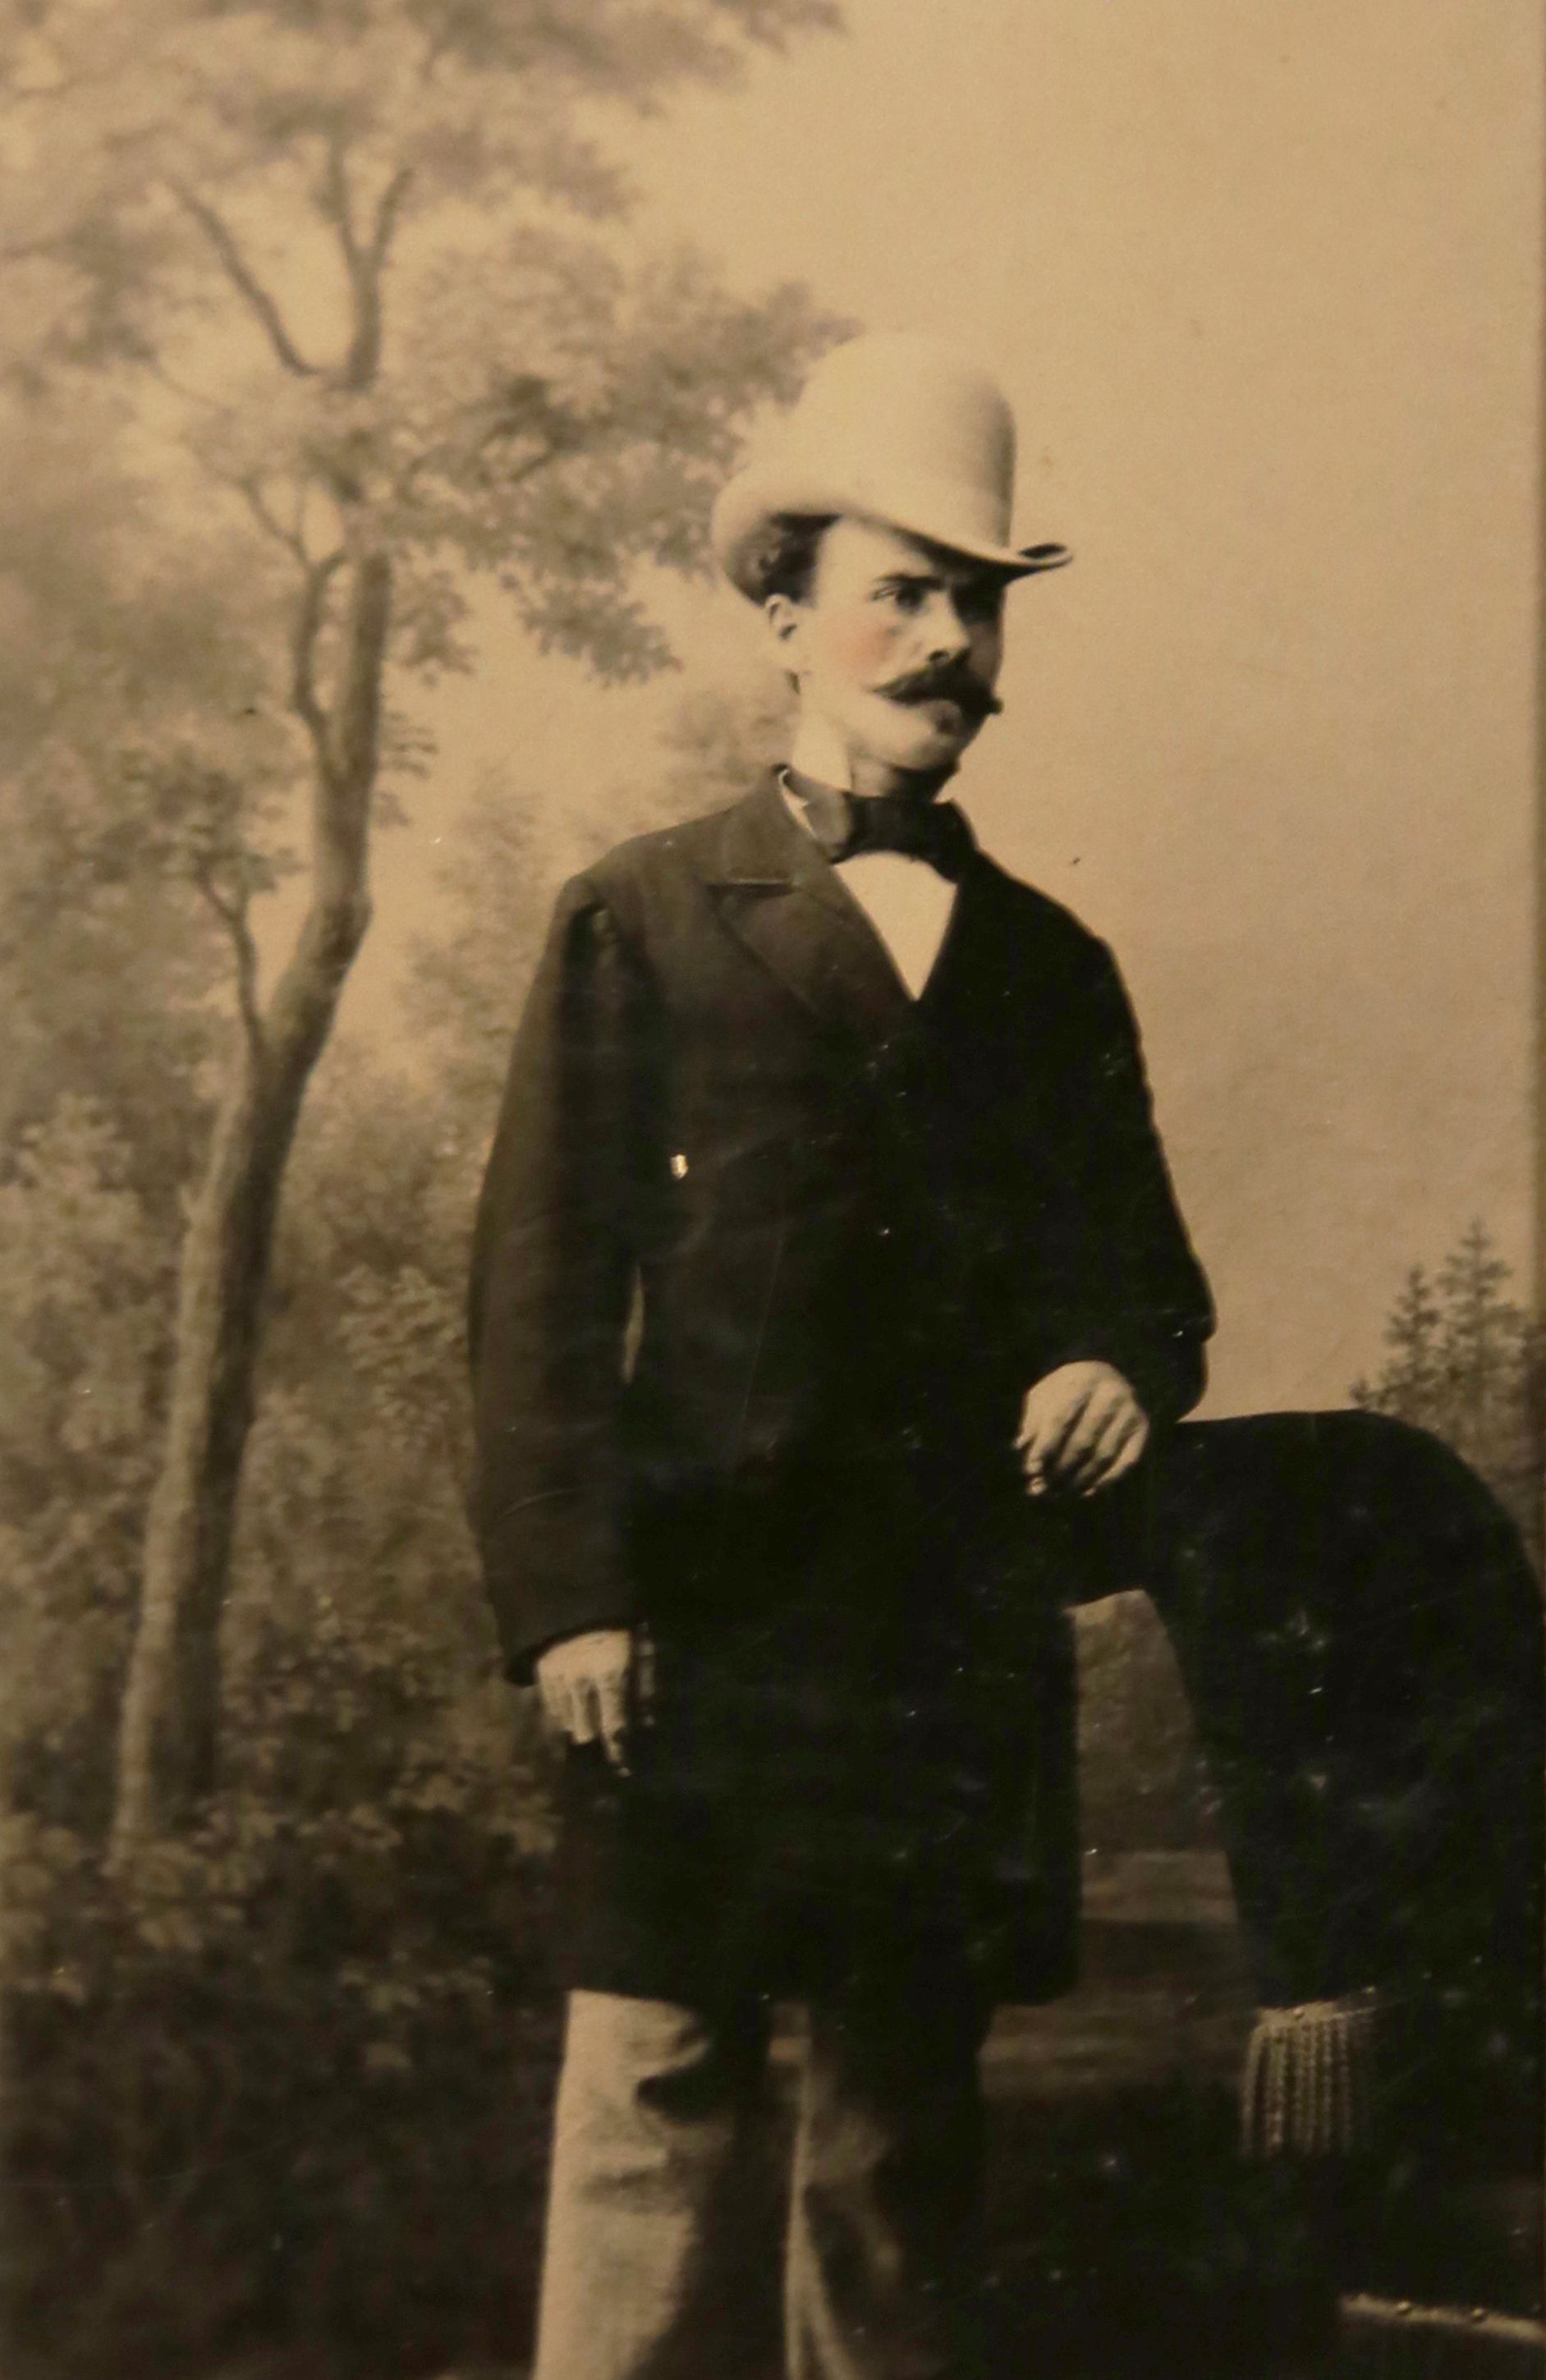 Studio portrait of a man standing in front of a nature background